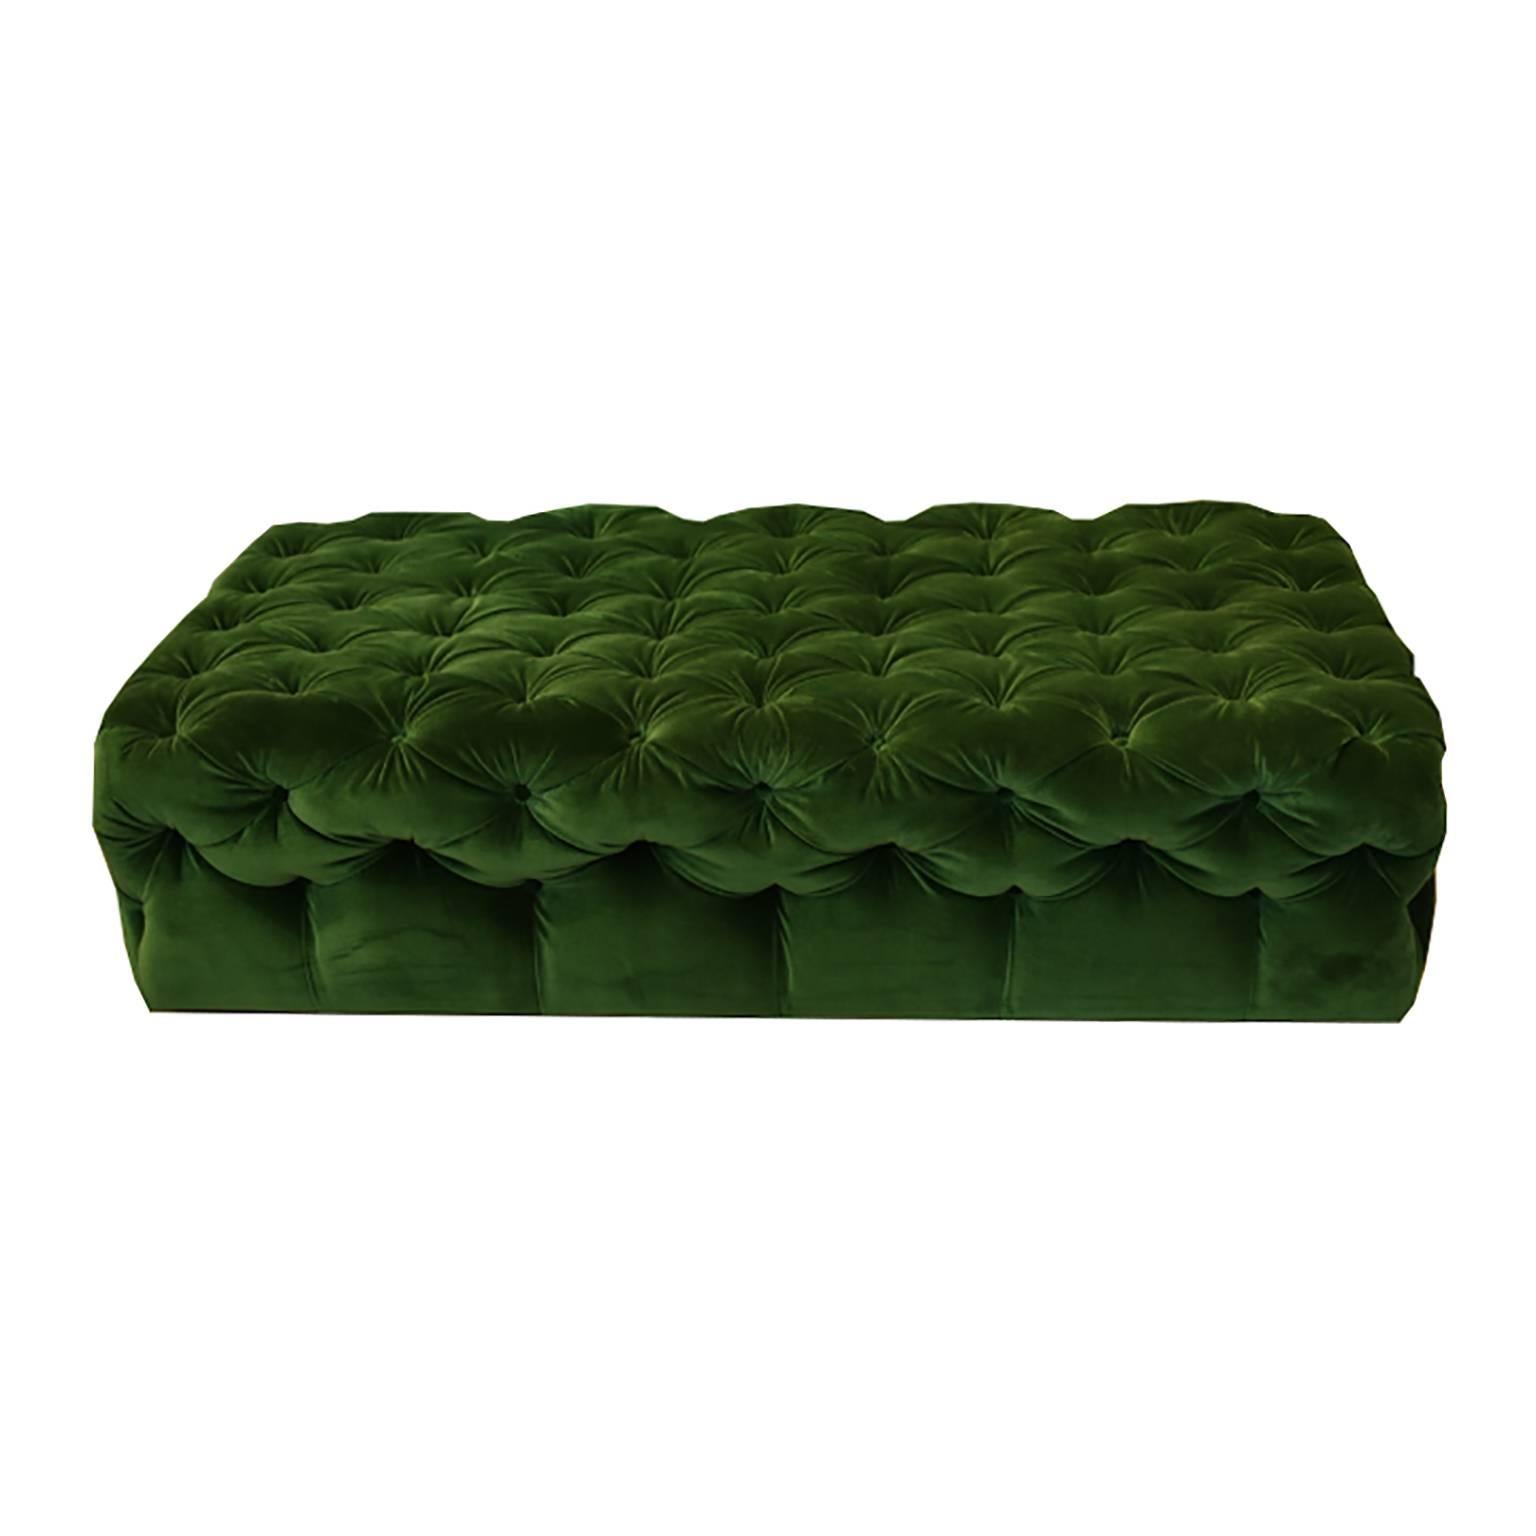 Modern Large Tufted Green Velvet Ottoman by Plantation and Room and Board, circa 2015